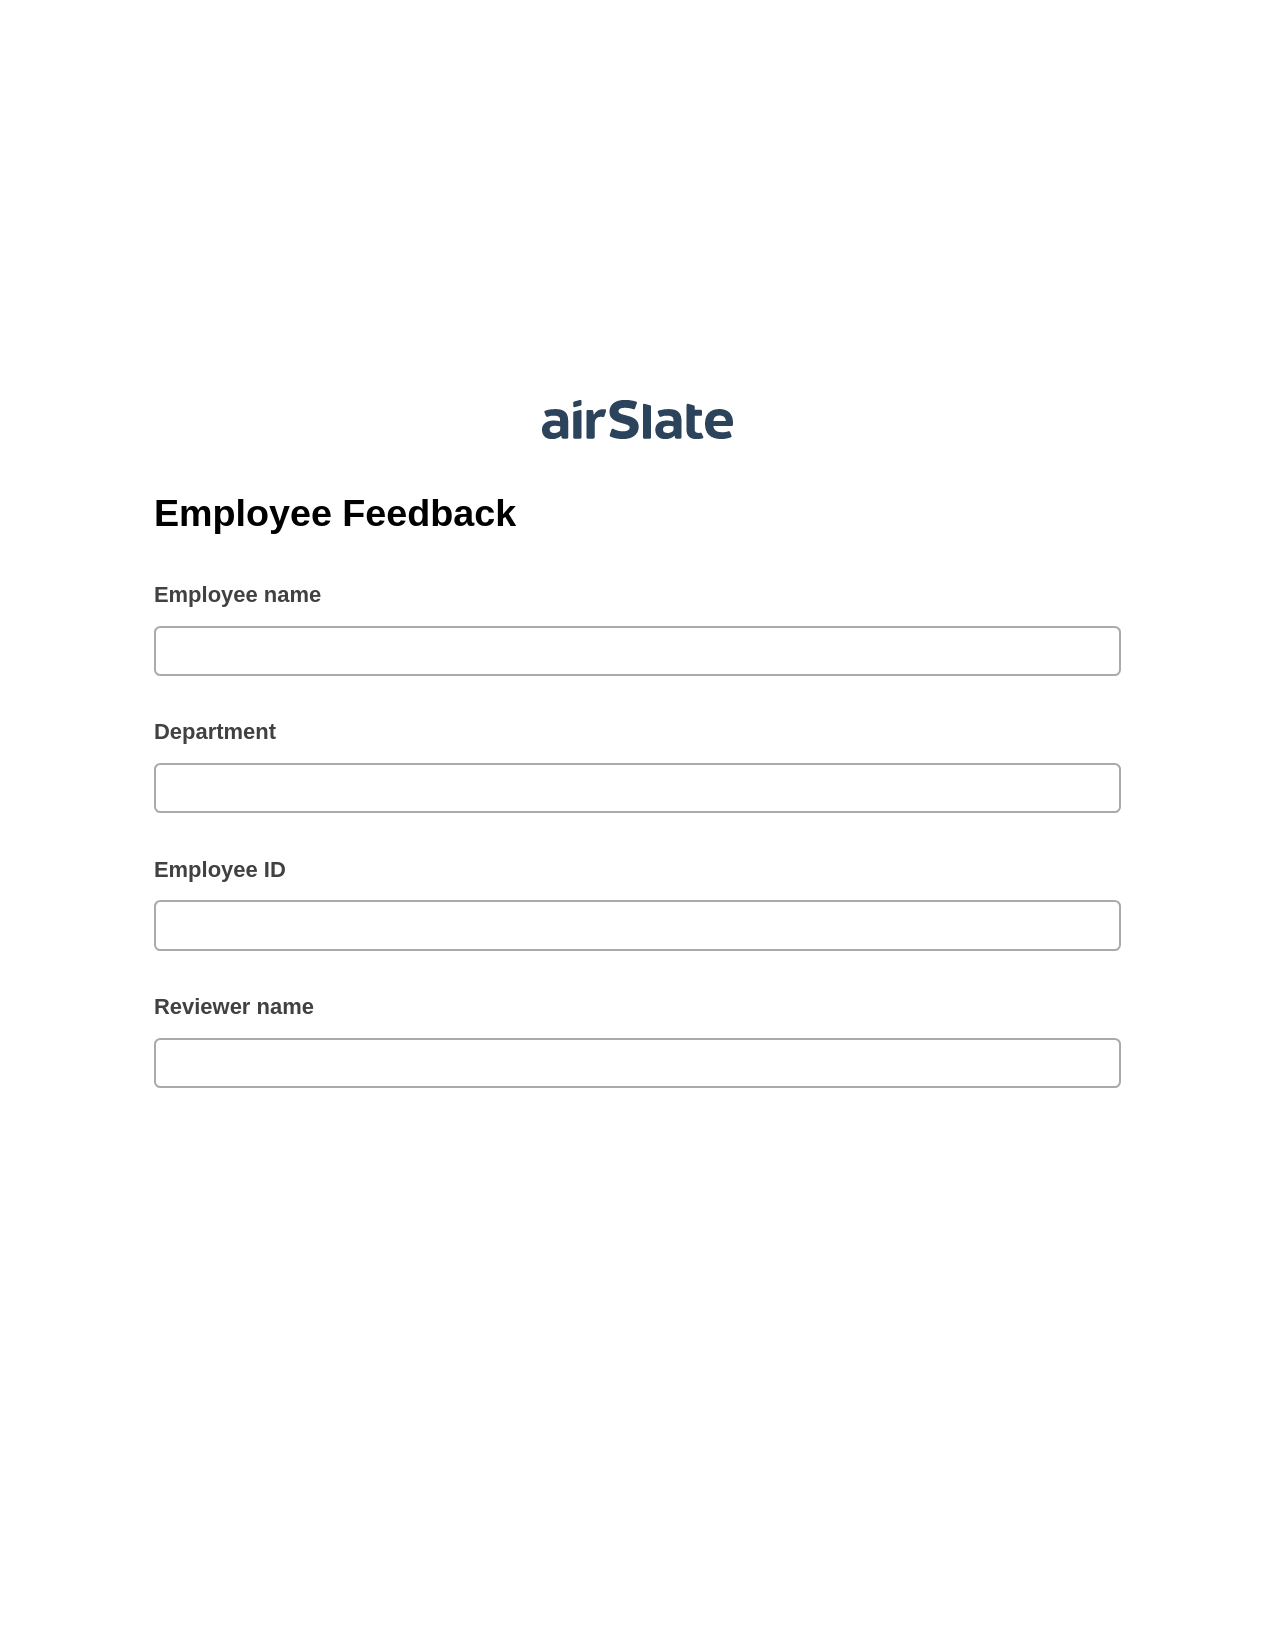 Employee Feedback Pre-fill from CSV File Bot, Add Tags to Slate Bot, Export to Smartsheet